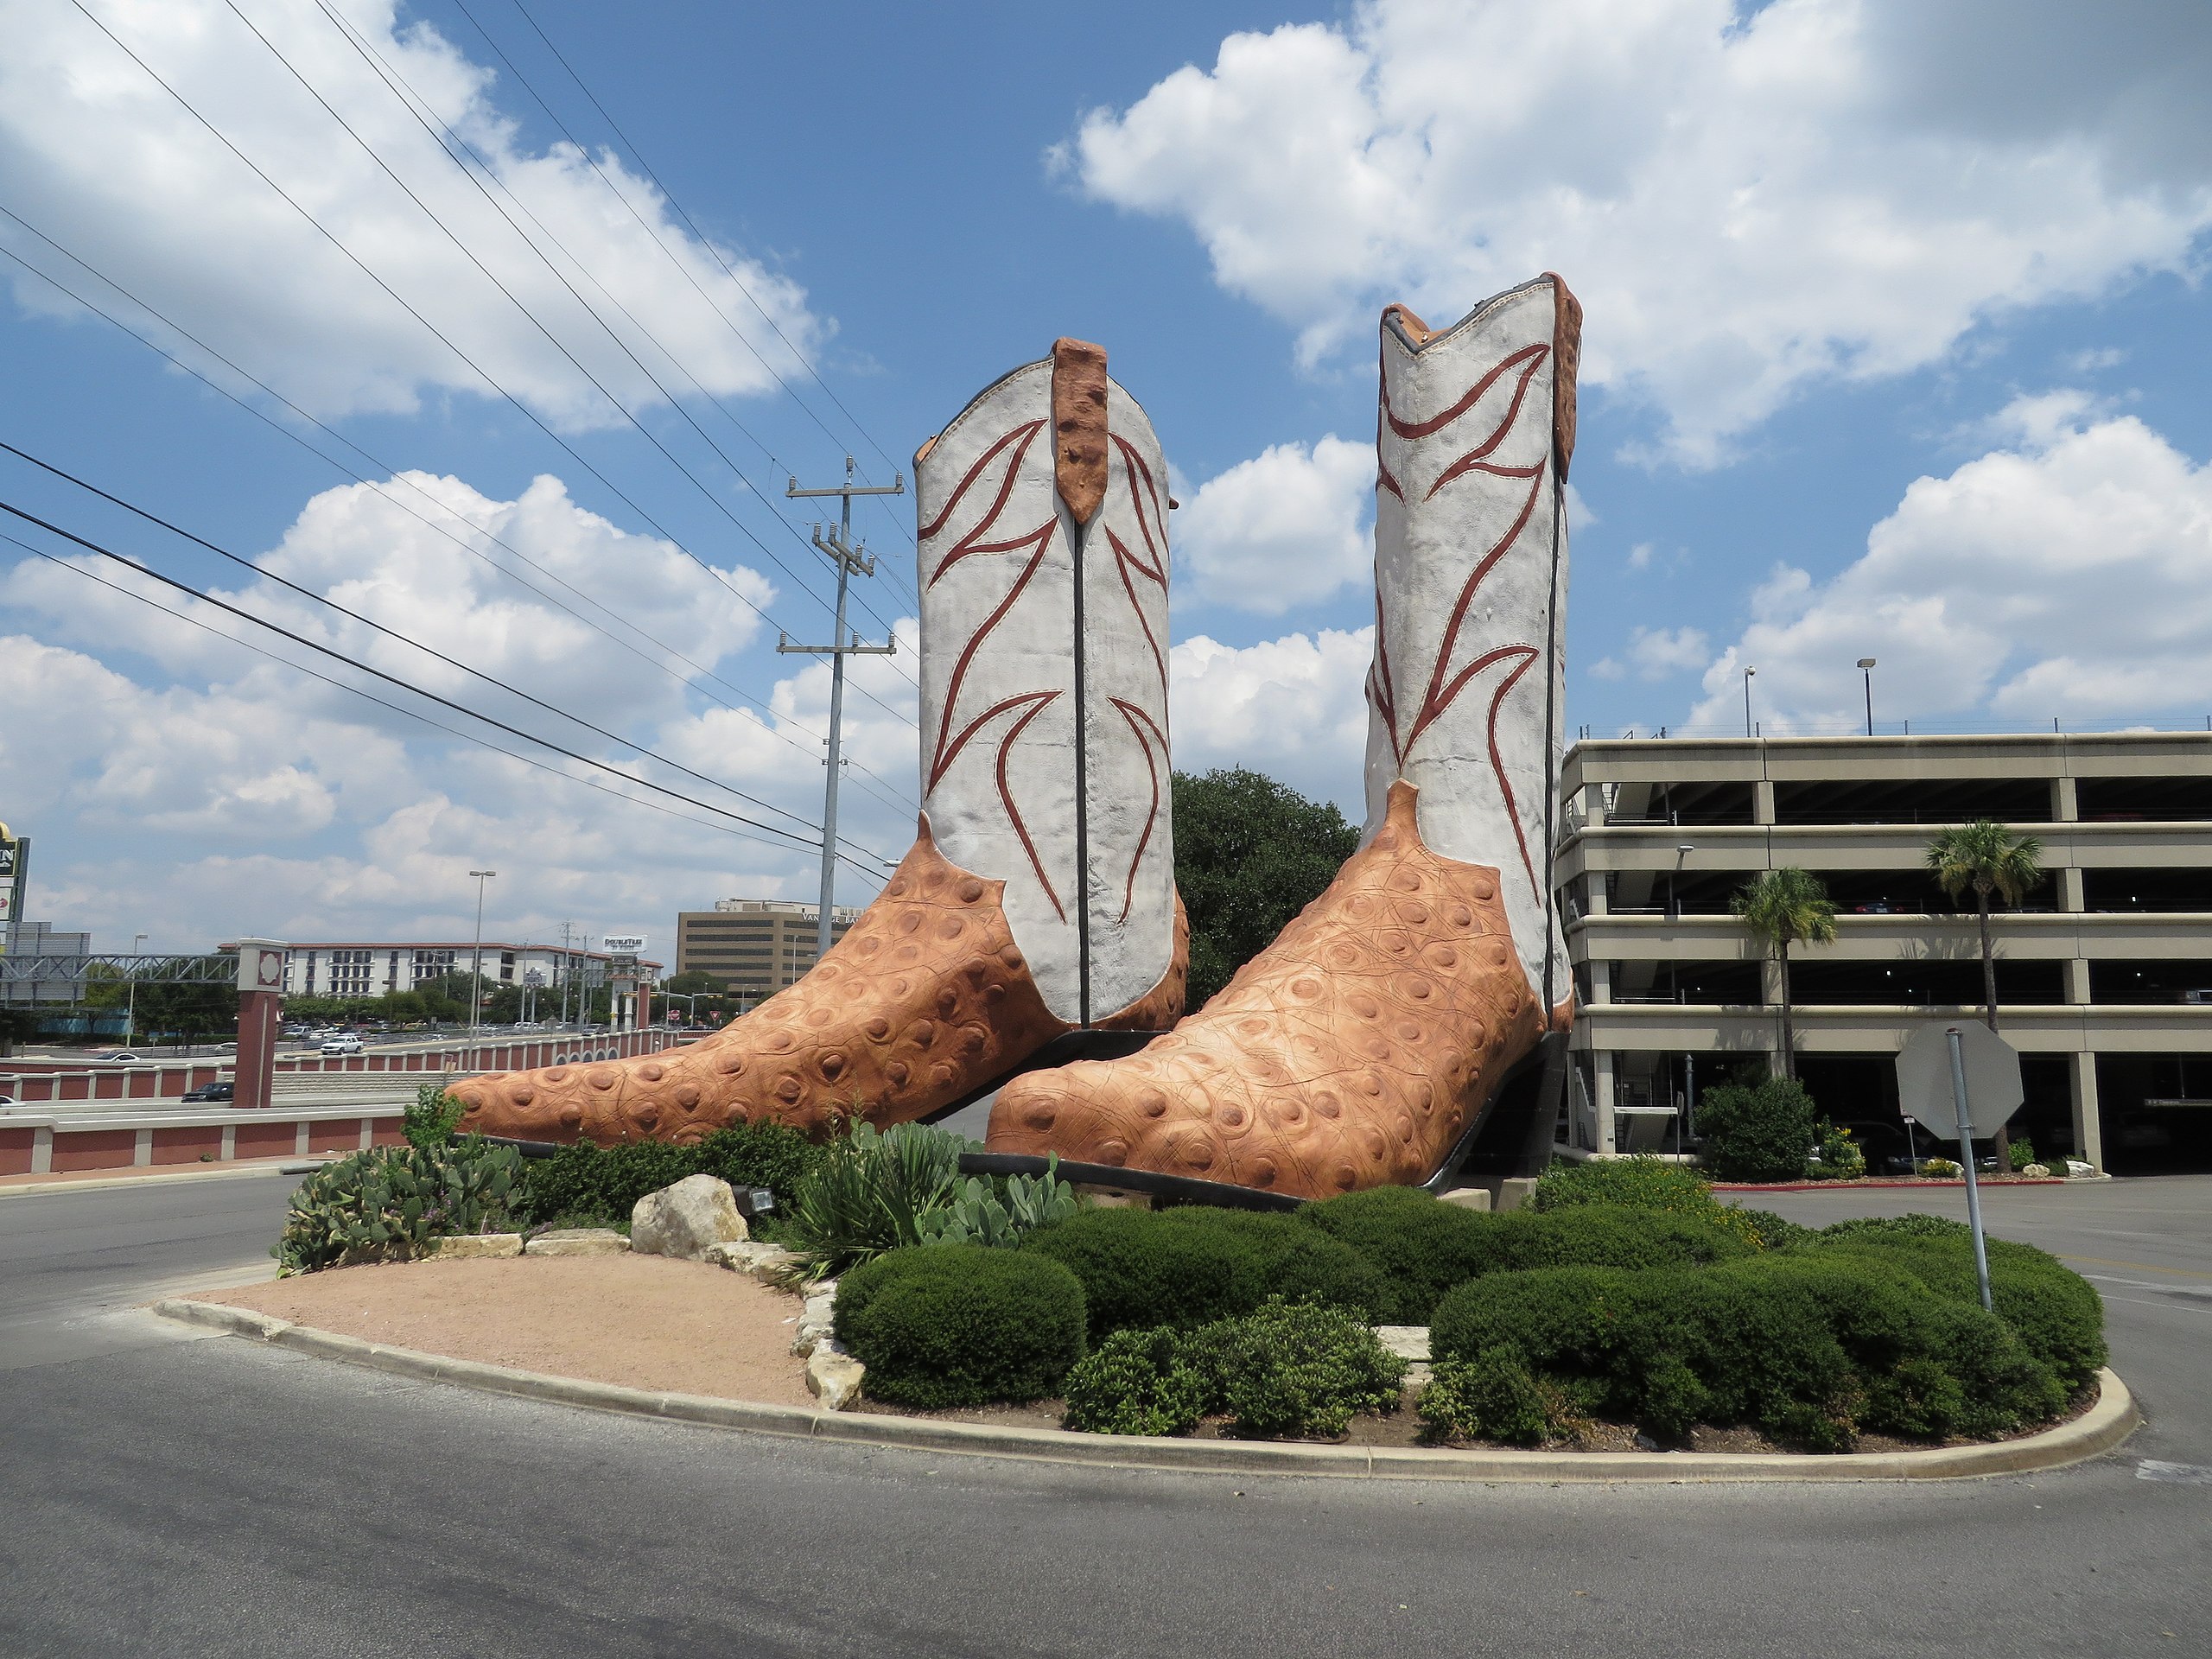 The giant cowboy boots at San Antonio's Northstar Mall Stock Photo